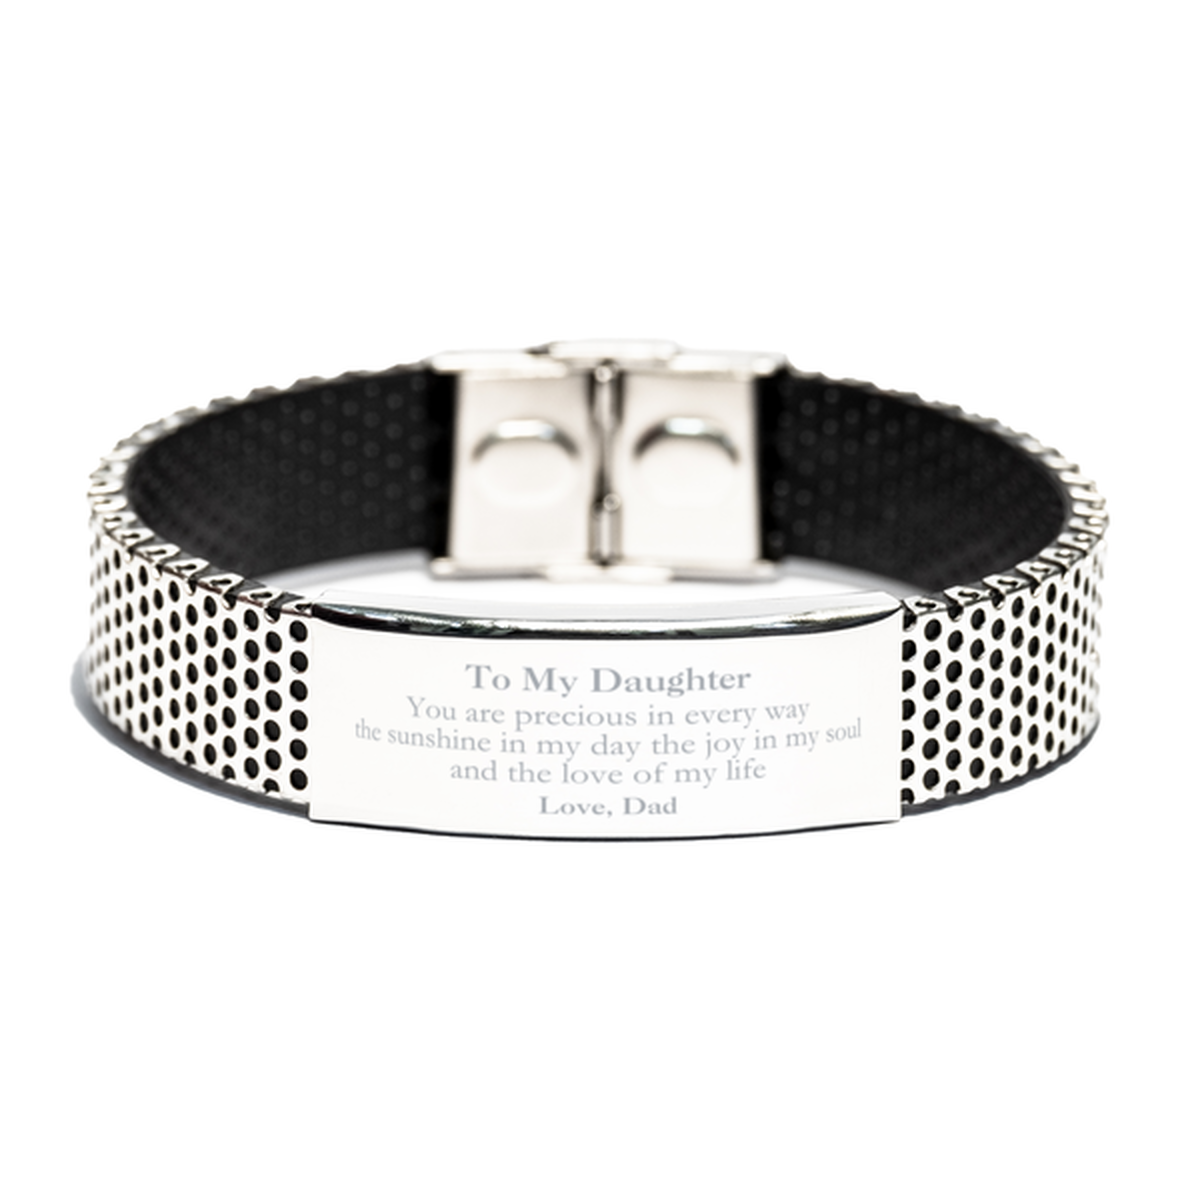 Graduation Gifts for Daughter Stainless Steel Bracelet Present from Dad, Christmas Daughter Birthday Gifts Daughter You are precious in every way the sunshine in my day. Love, Dad